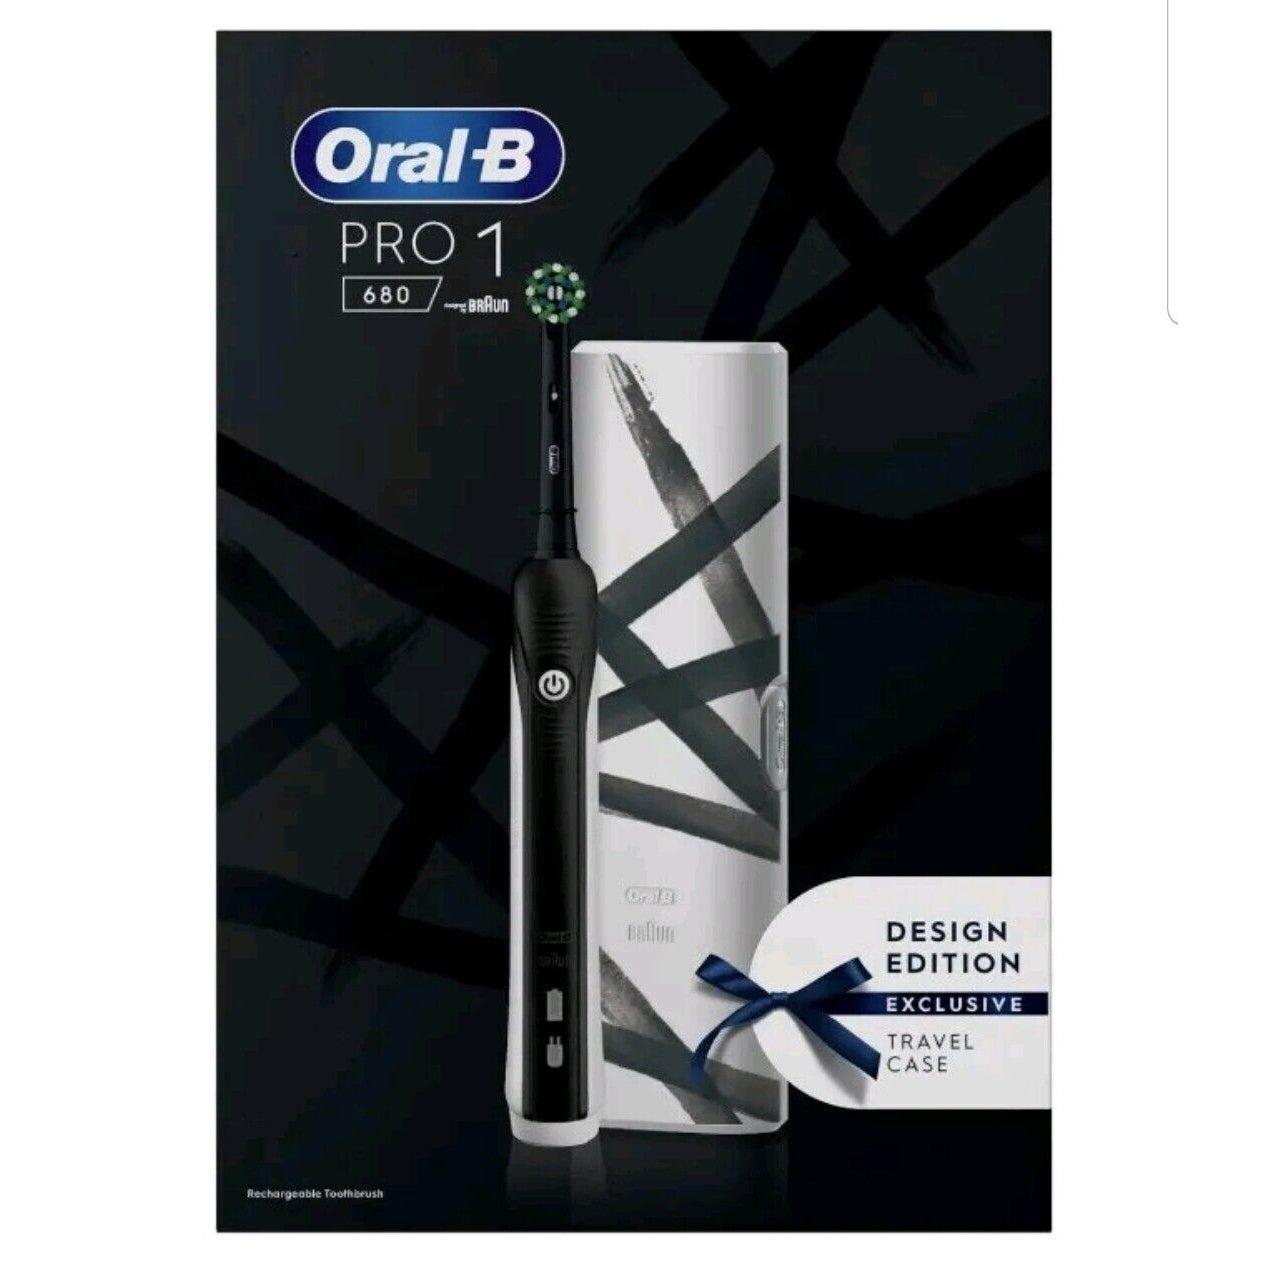 Oral B Pro 1 680 Electric Rechargeable Toothbrush With Travel Case - Black - Healthxpress.ie